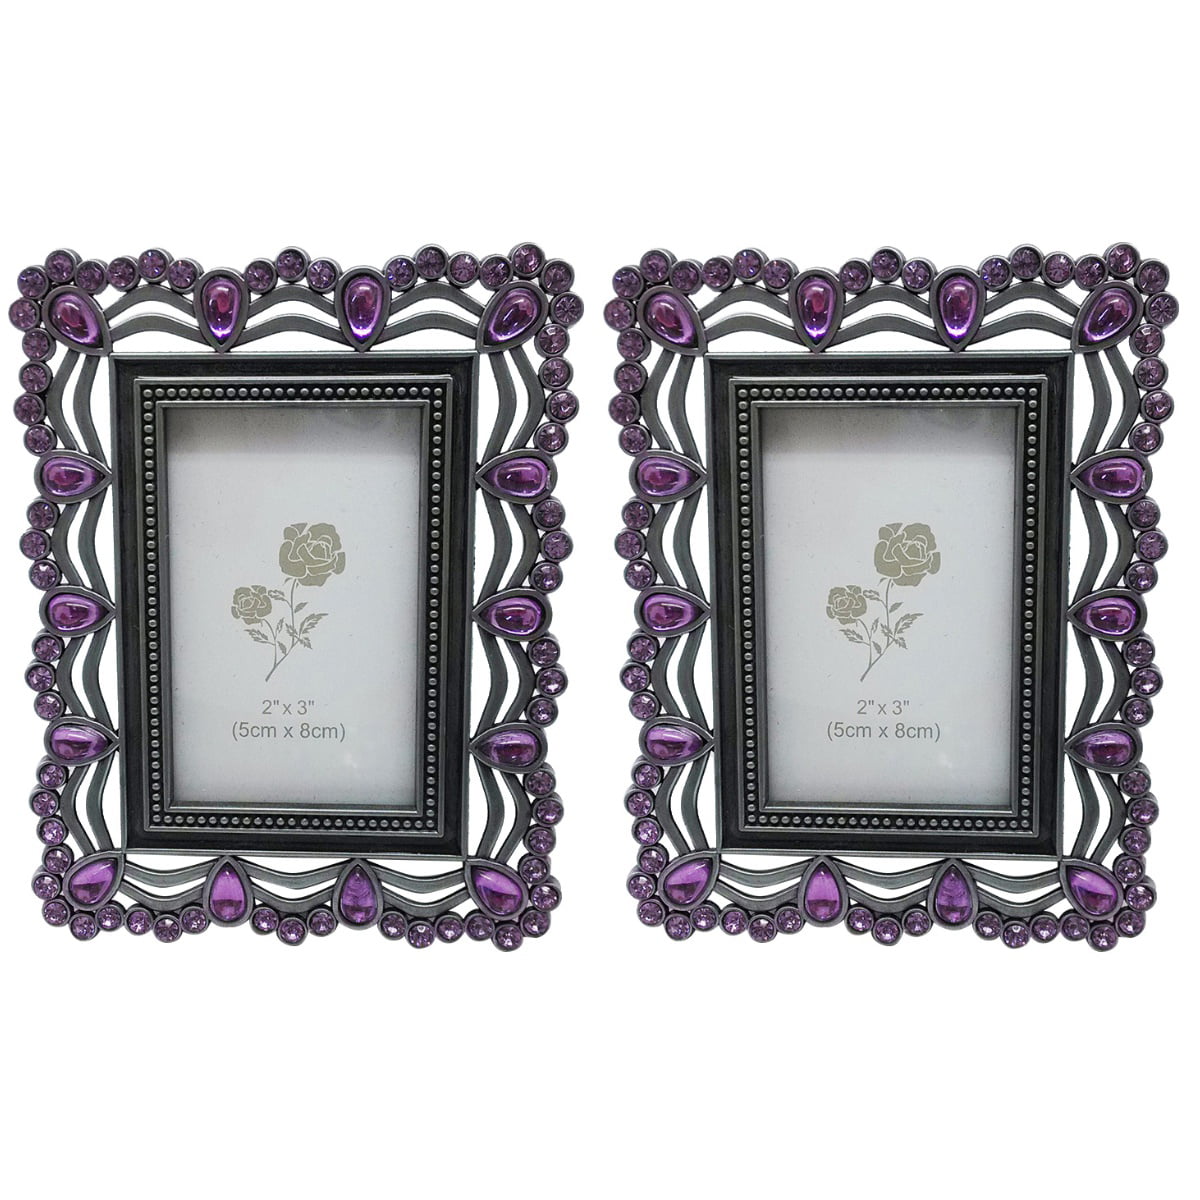 Clustered Rhinestones Heart Shaped 6.5 x 8 inch Zinc Alloy Table Top Photo Frame,Ivory